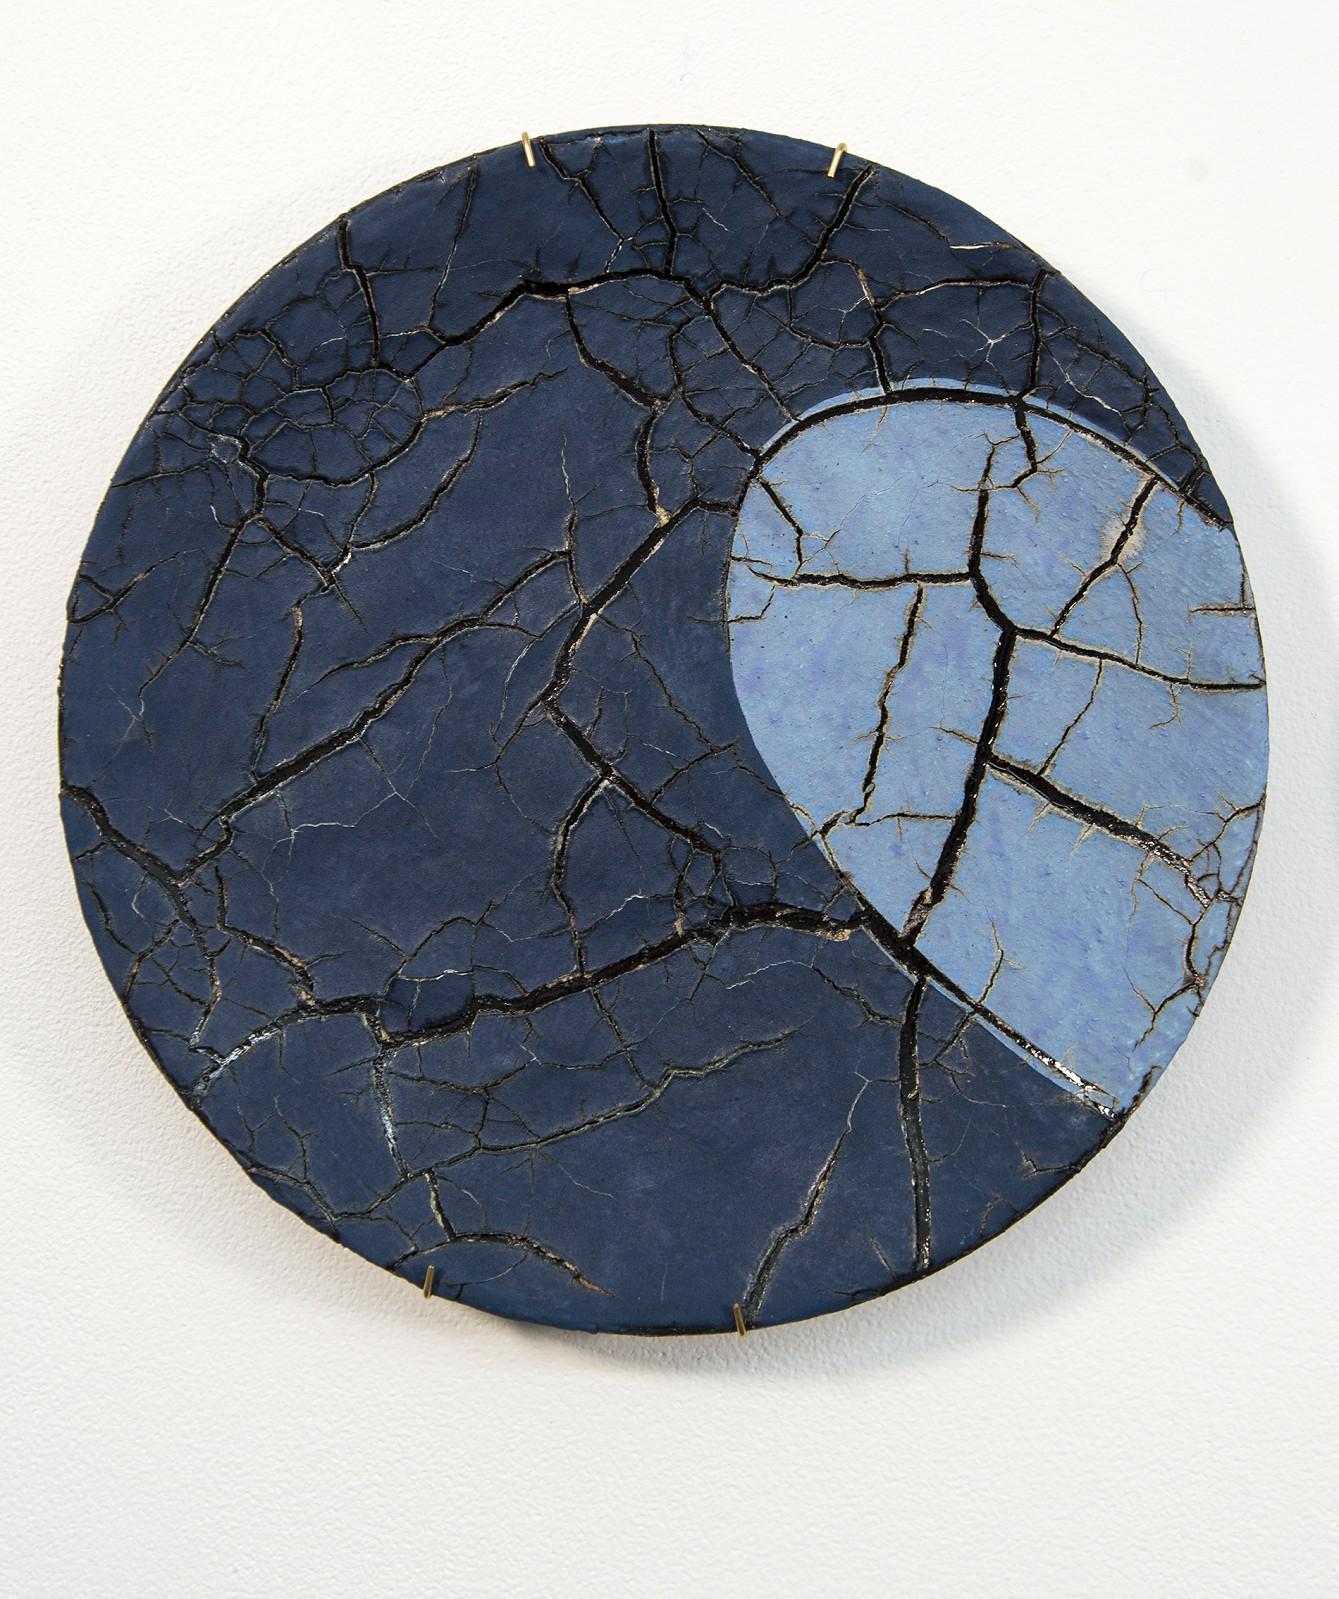 Canadian ceramicist Steven Heinemann has departed from his love of vessels to create two plates; each part of the whole. In colours ranging from sky blue to midnight blue, the plate’s pattern is reminiscent of a view of the world from above. The